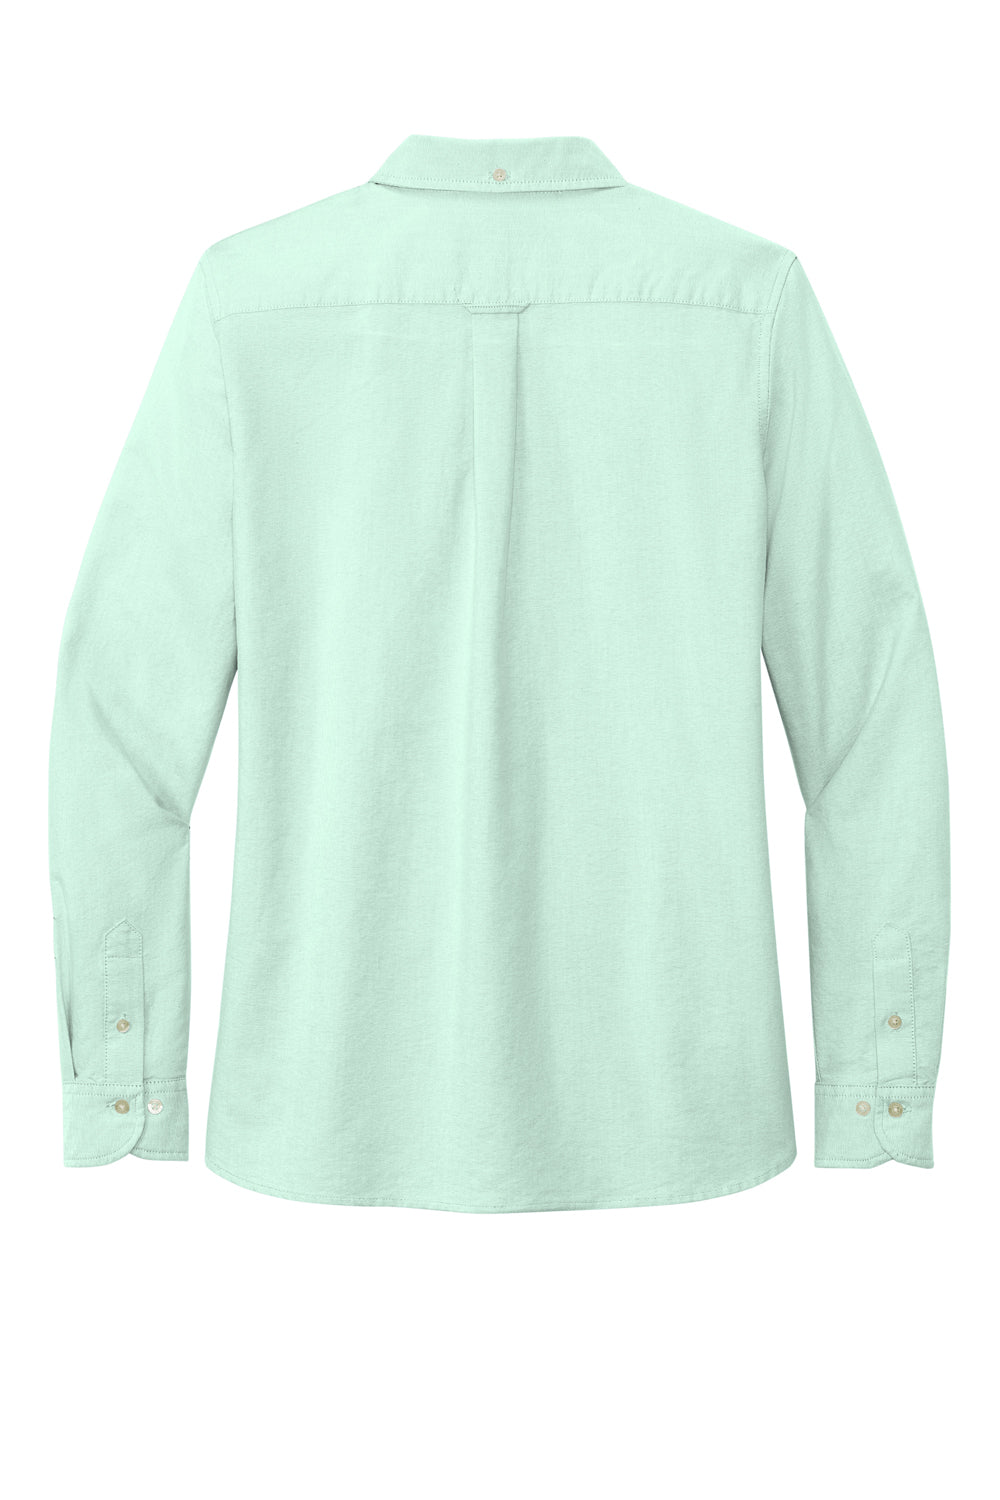 Brooks Brothers Womens Casual Oxford Long Sleeve Button Down Shirt Soft Mint Green Flat Back